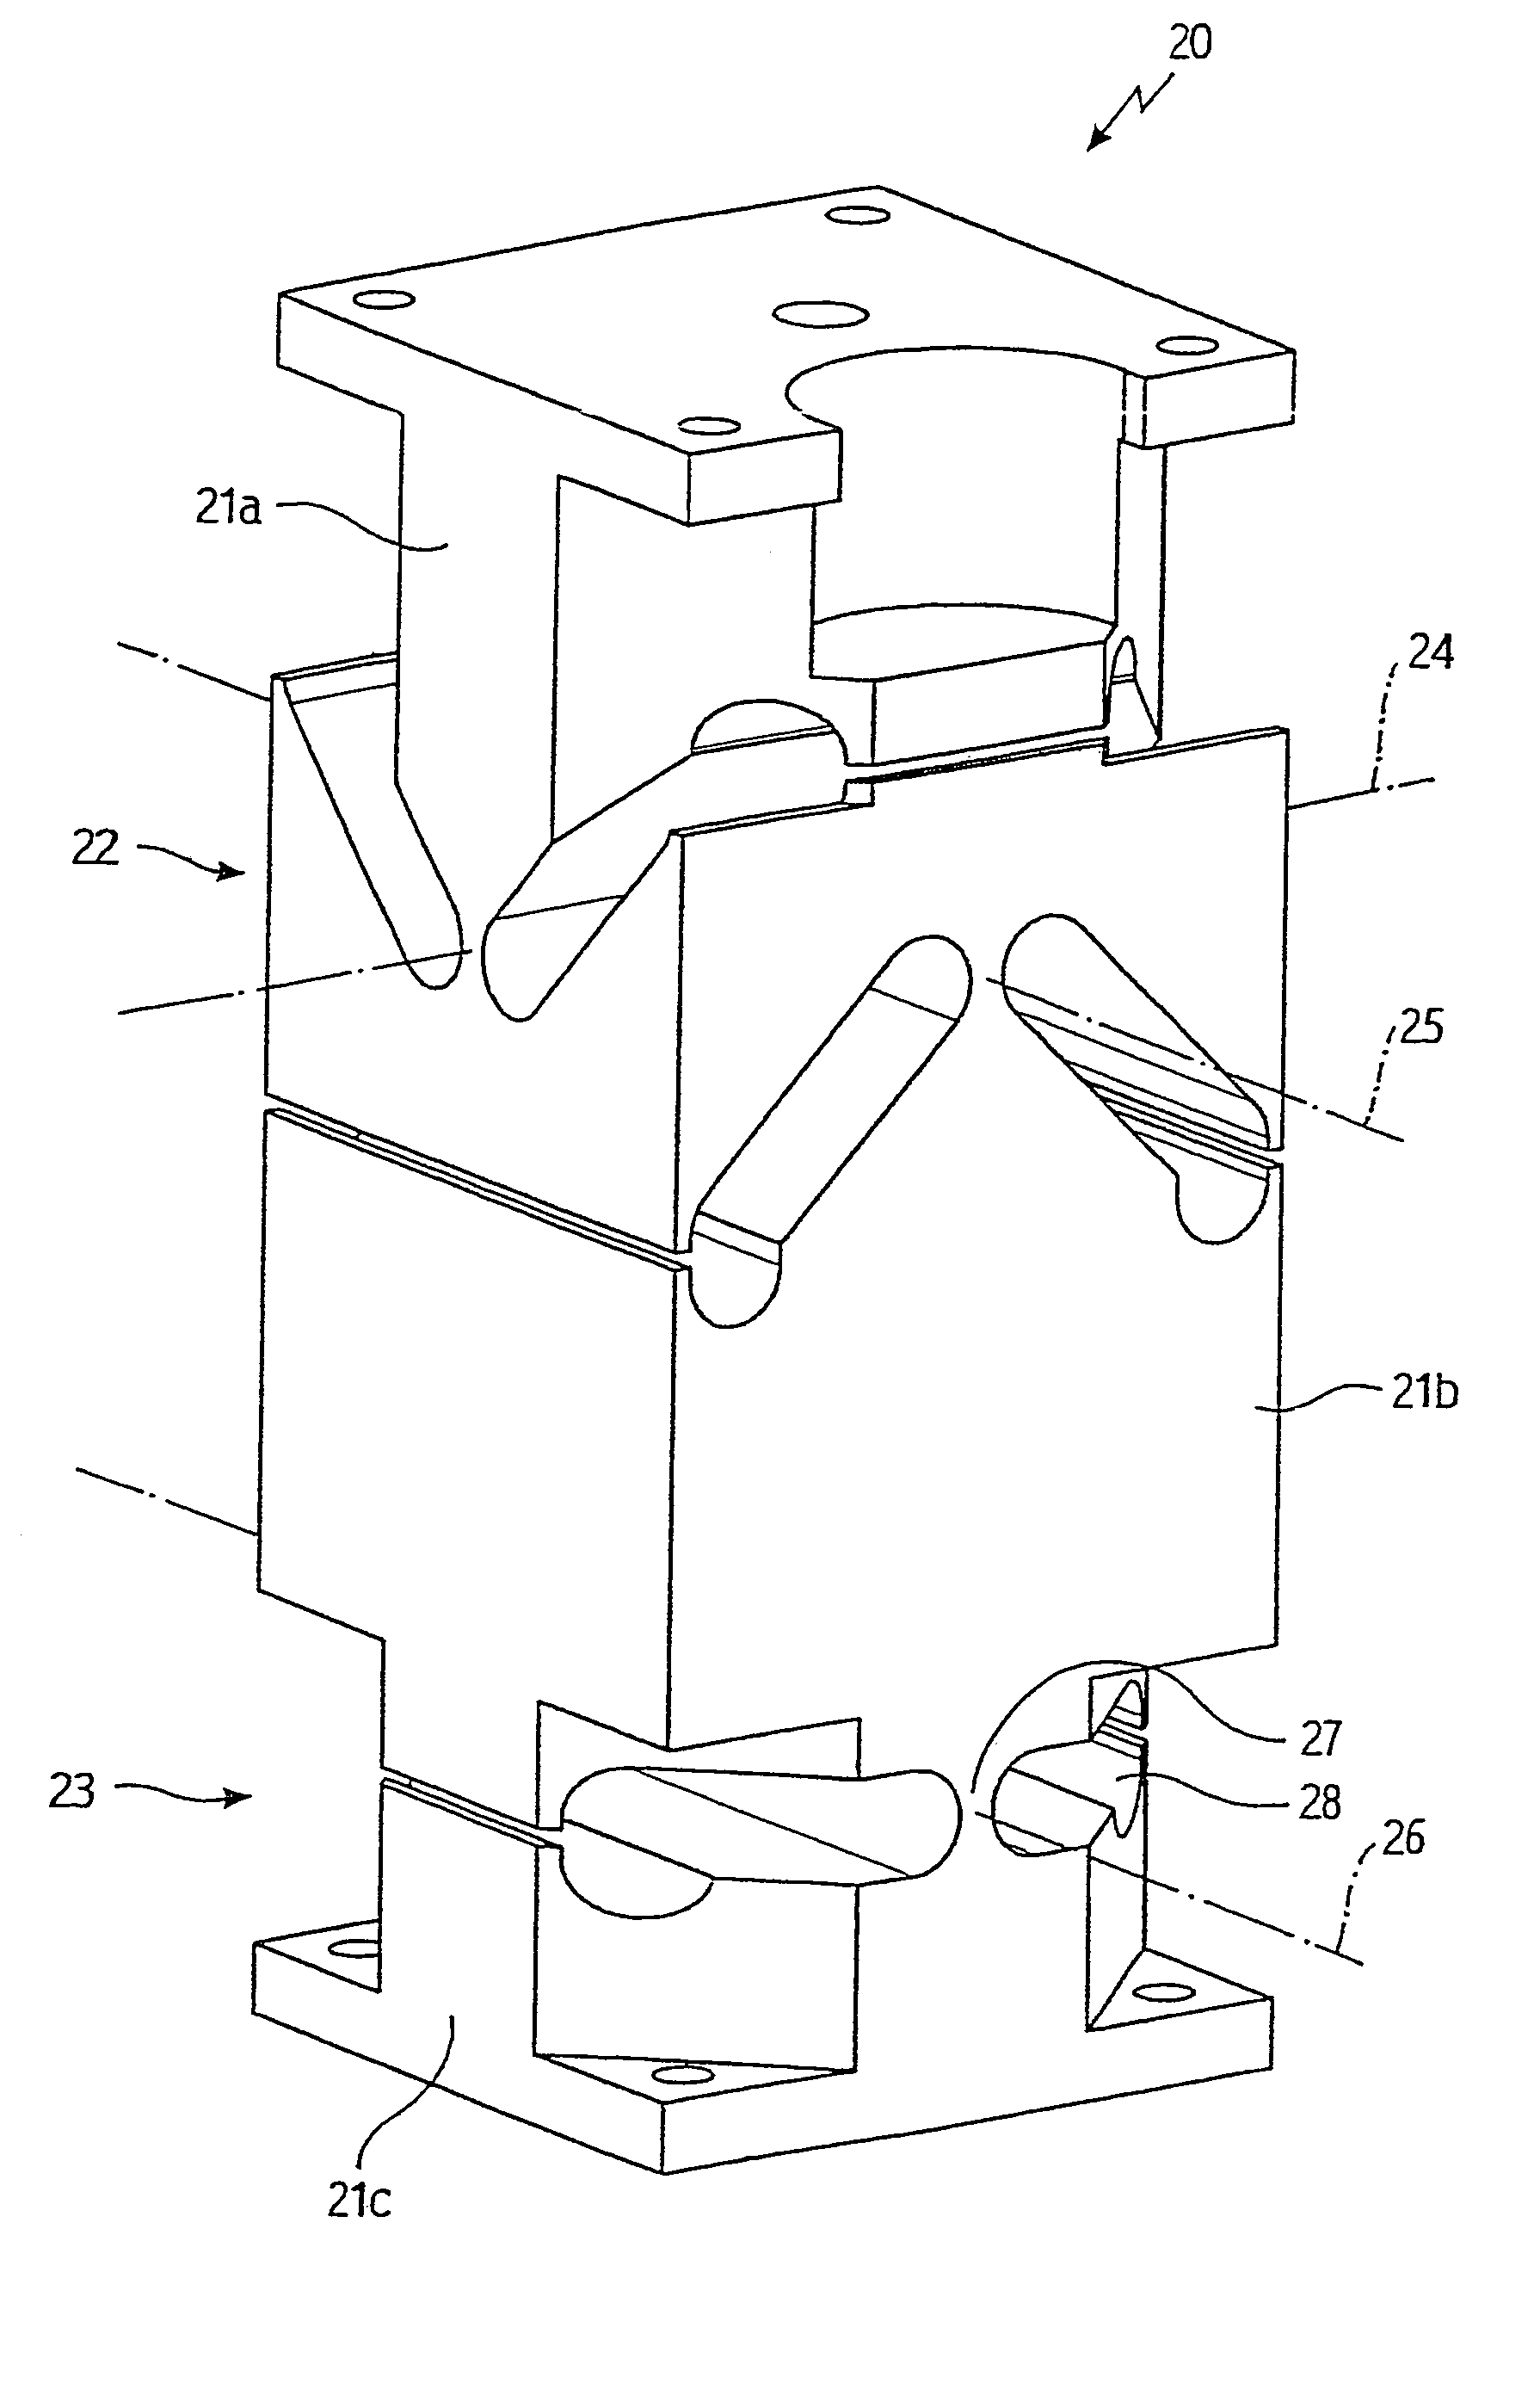 Articulated bearing supports for laser resonators